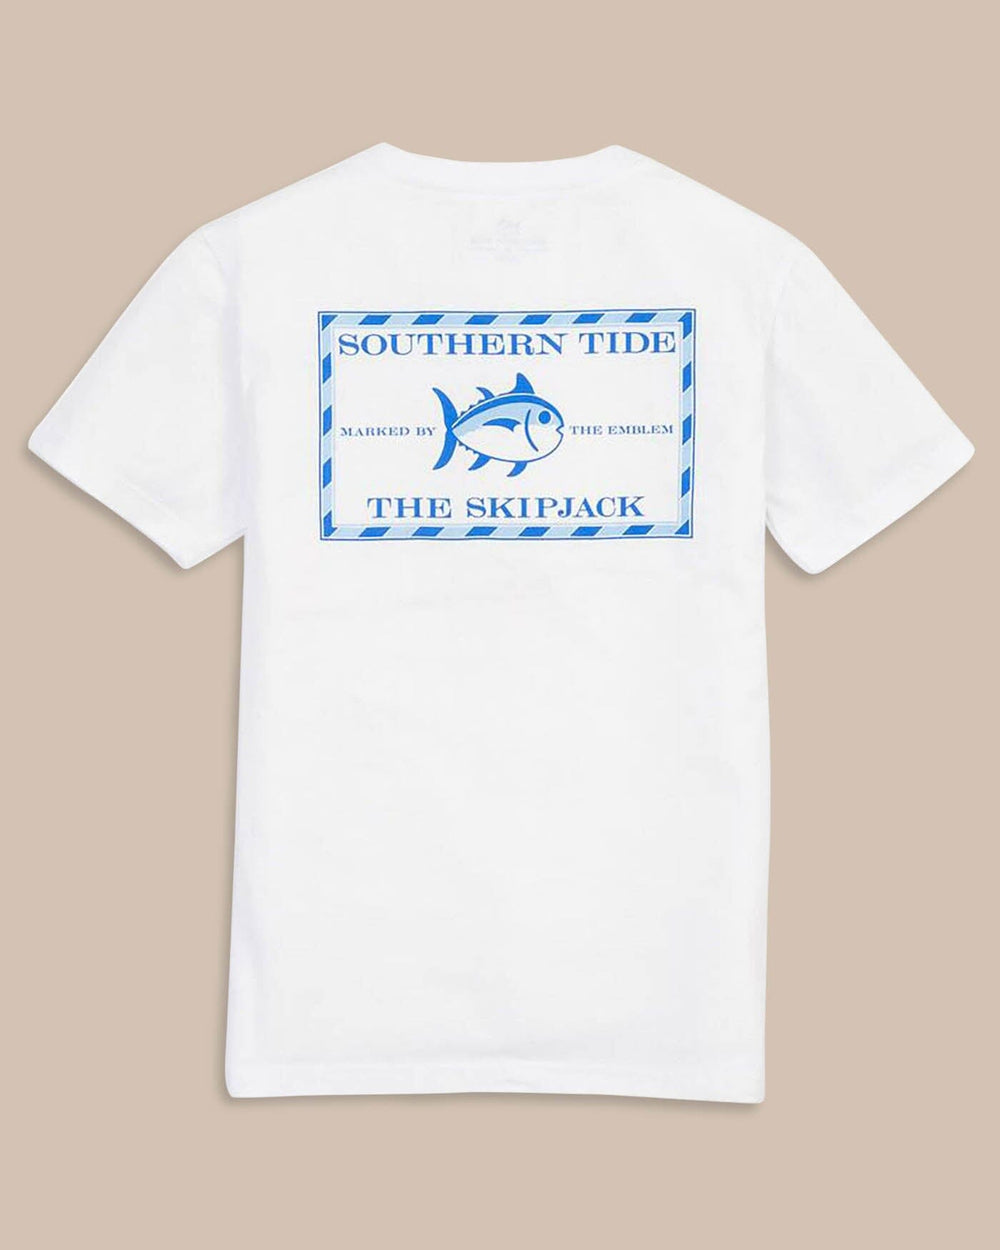 The back view of the Kid's White Original Skipjack T-Shirt by Southern Tide - Classic White